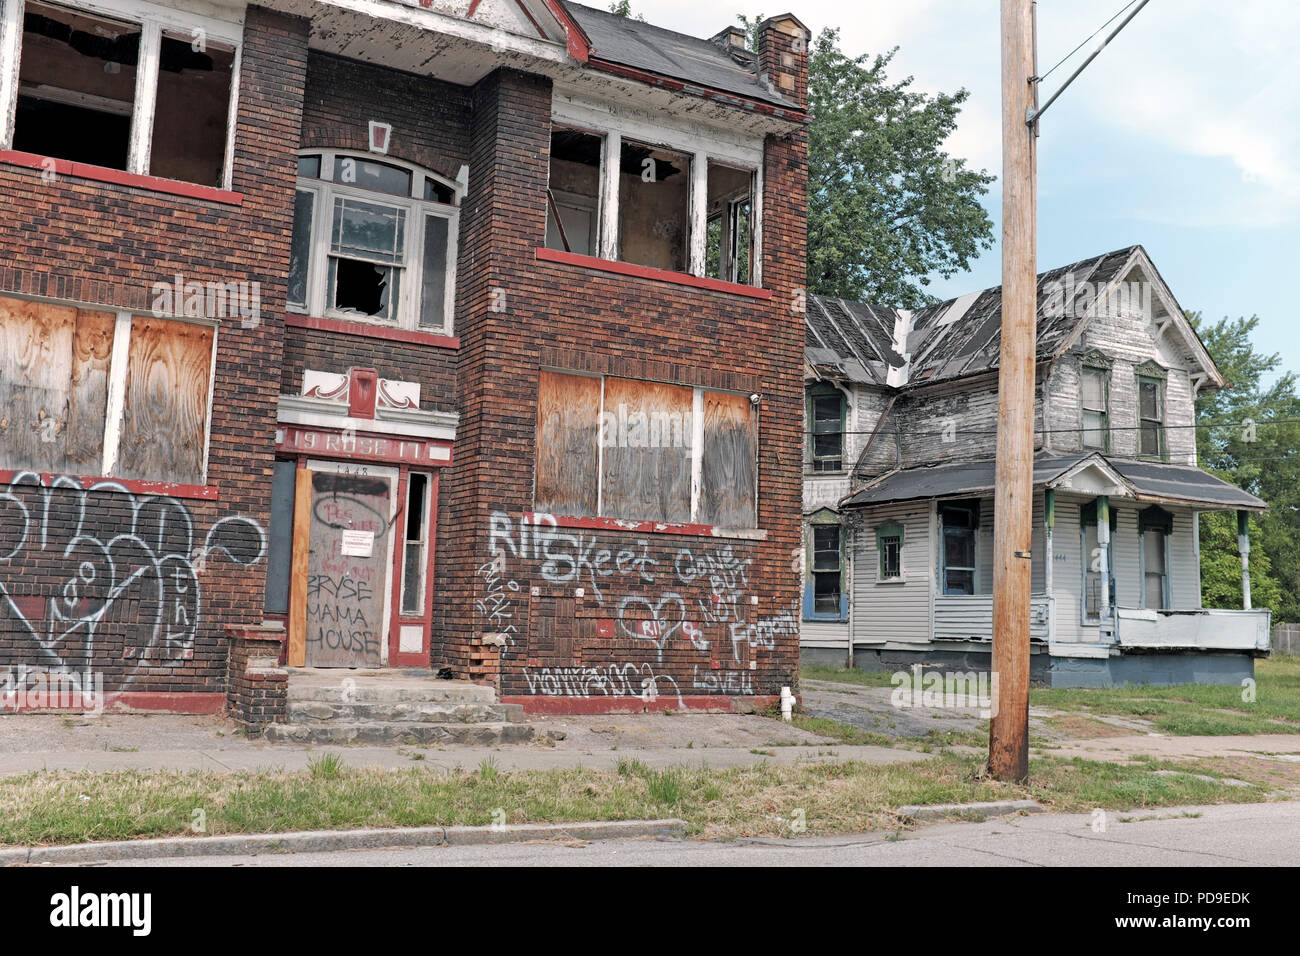 east-cleveland-ohio-has-become-synonymous-with-urban-decay-many-pockets-of-the-city-are-filled-with-condemned-vacant-and-blighted-buildings-PD9EDK.jpg